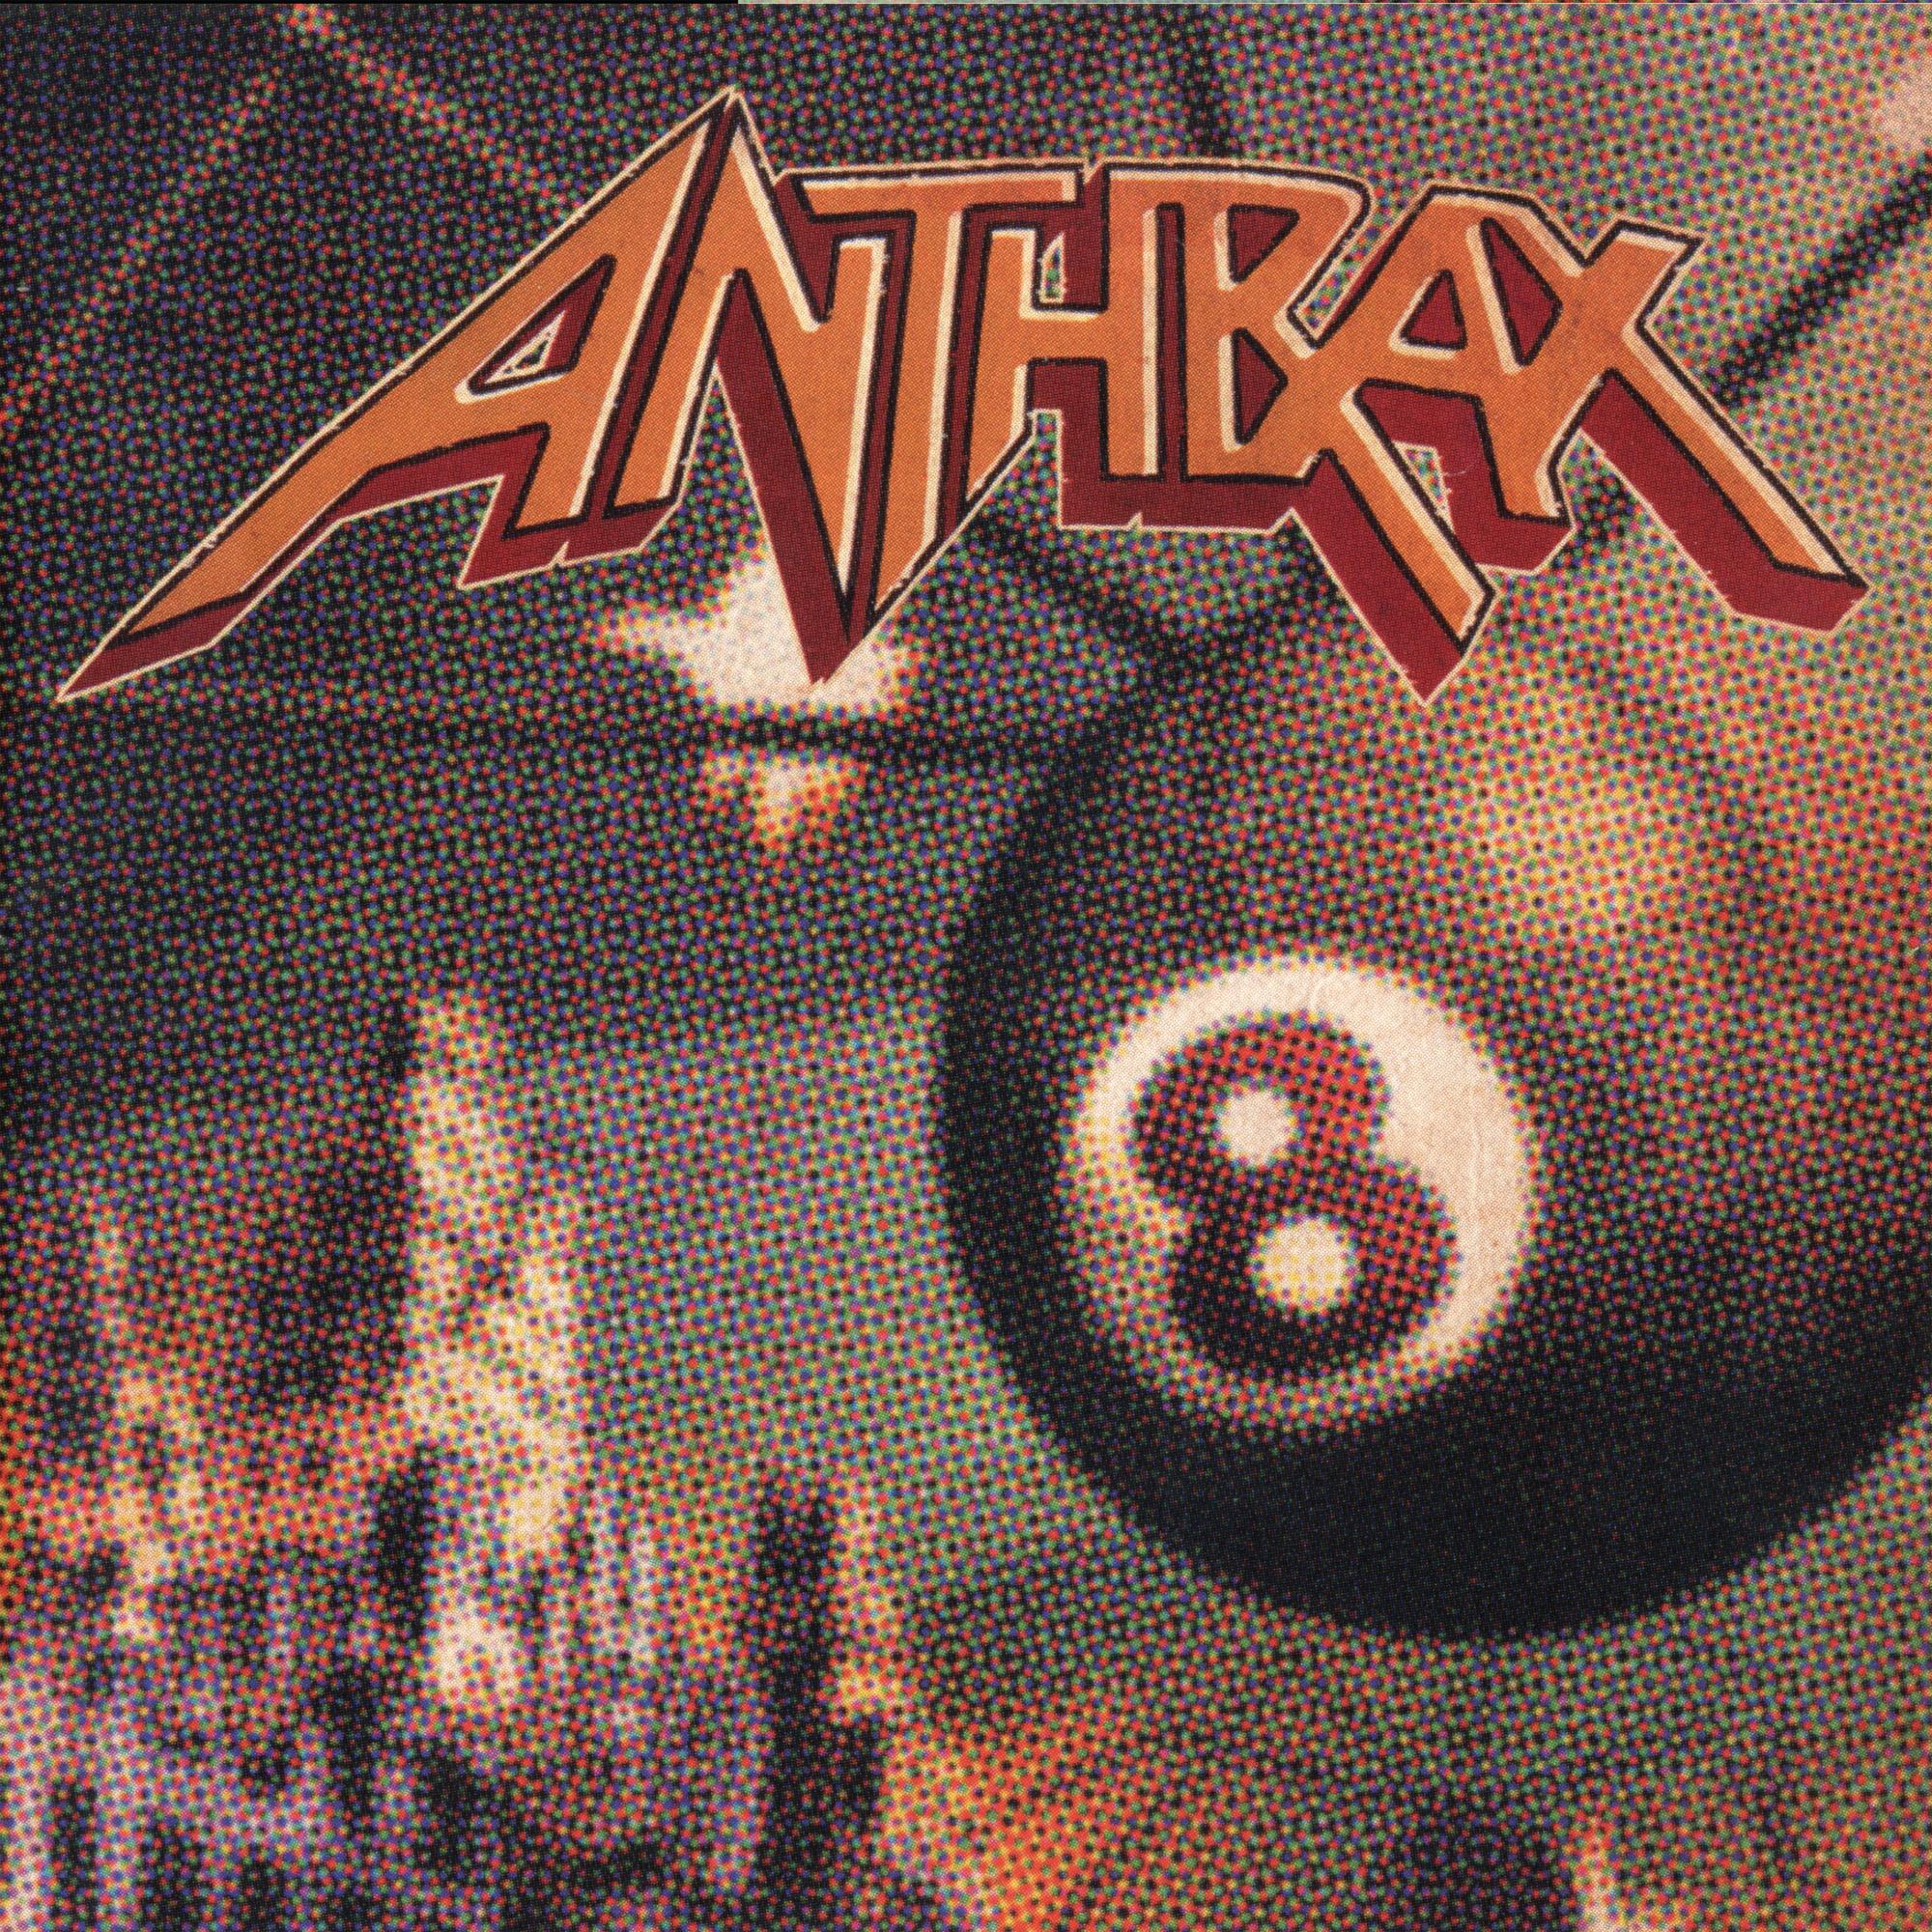 Anthrax - Volume 8 - The Threat Is Real (Vinyl 2LP)